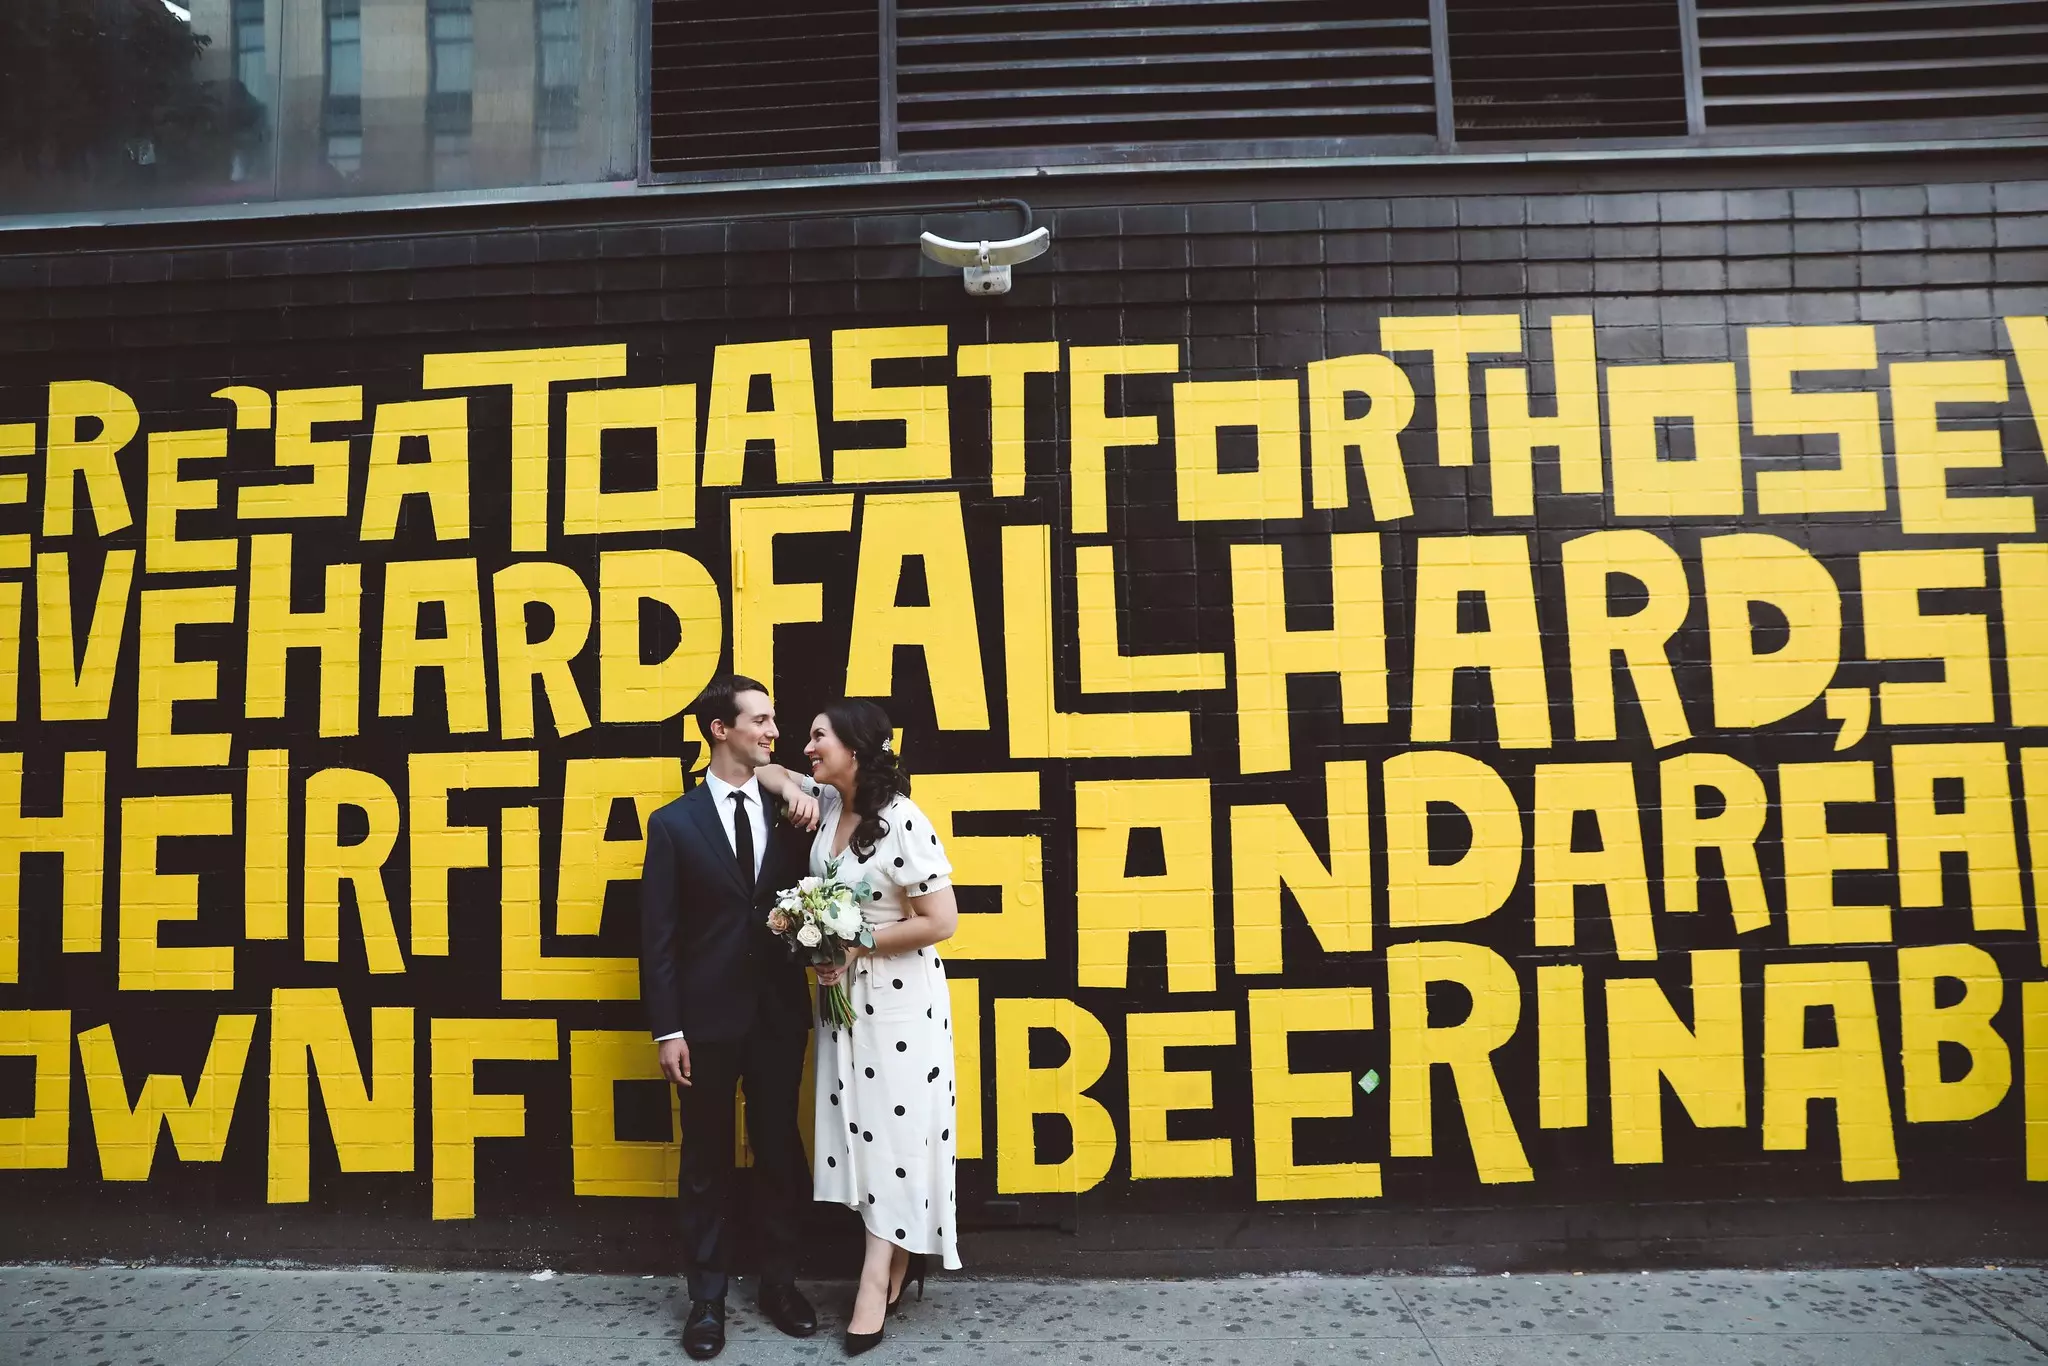 Wedding couple standing under a sign that says Robinson